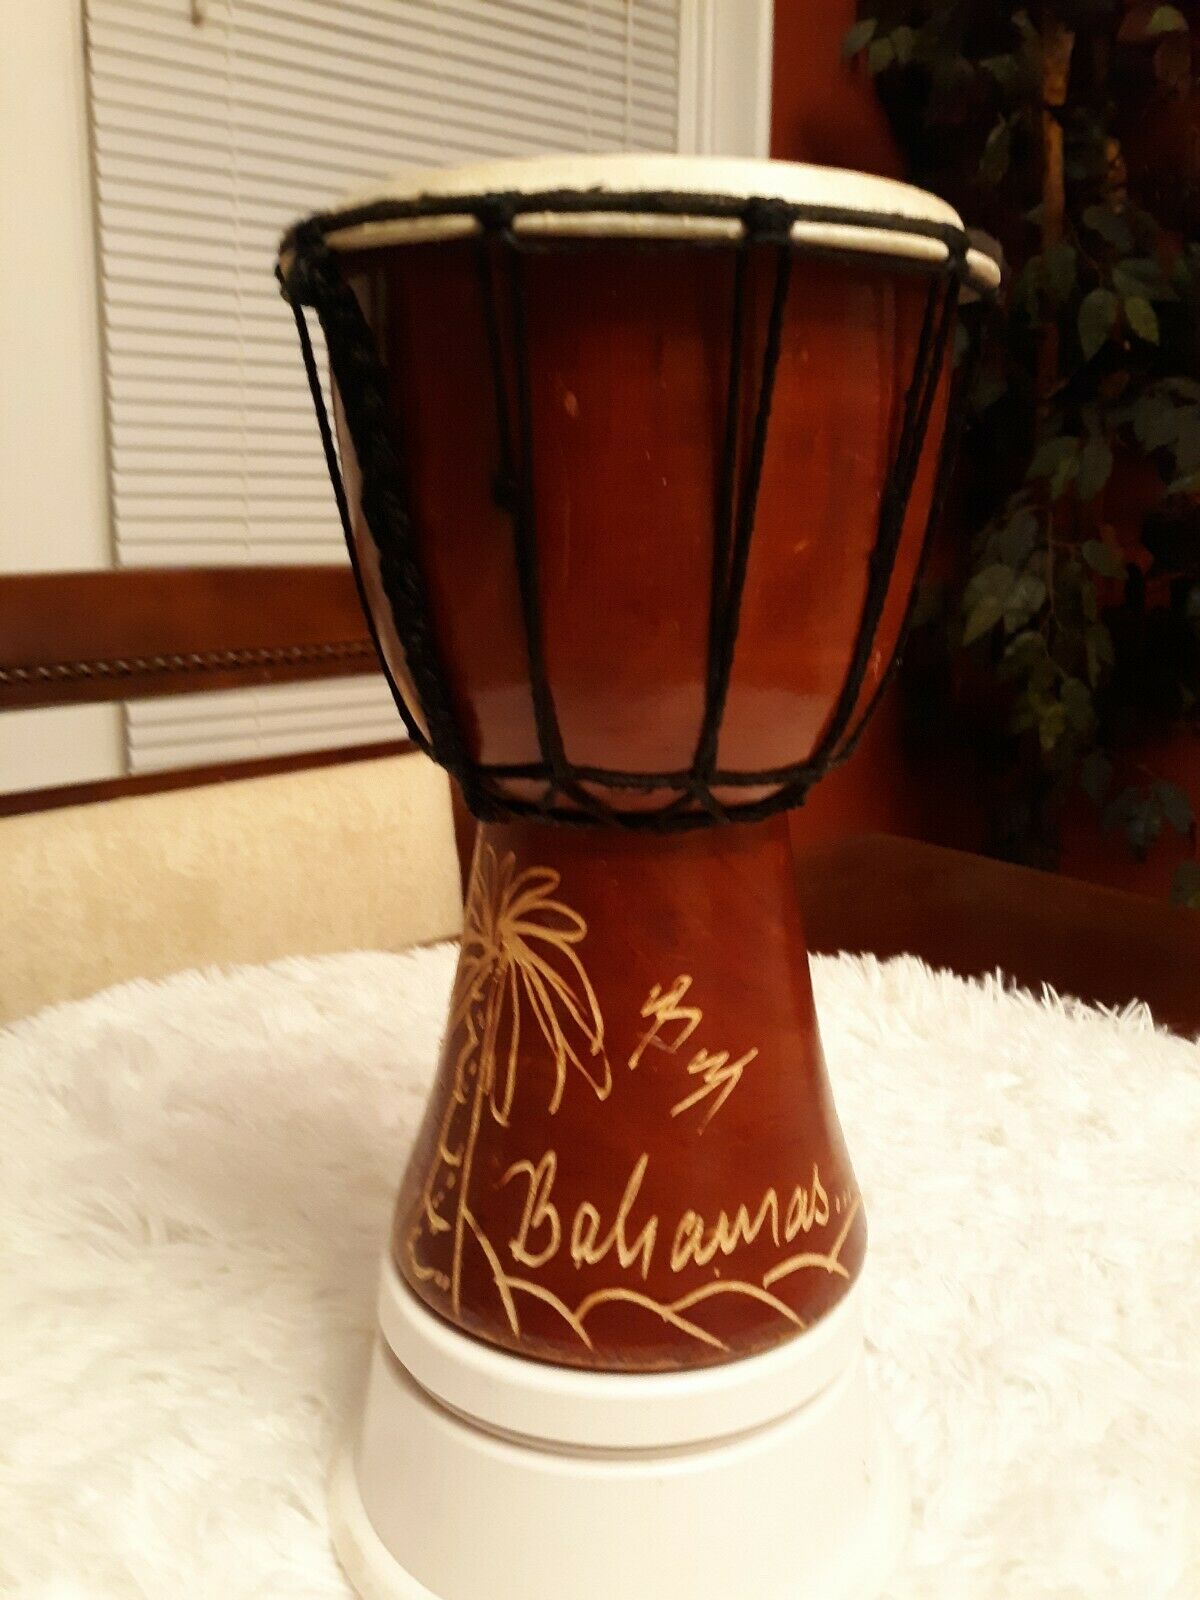 Hand Crafted Bongo Drum From The Bahamas Souvenir Collector's Item